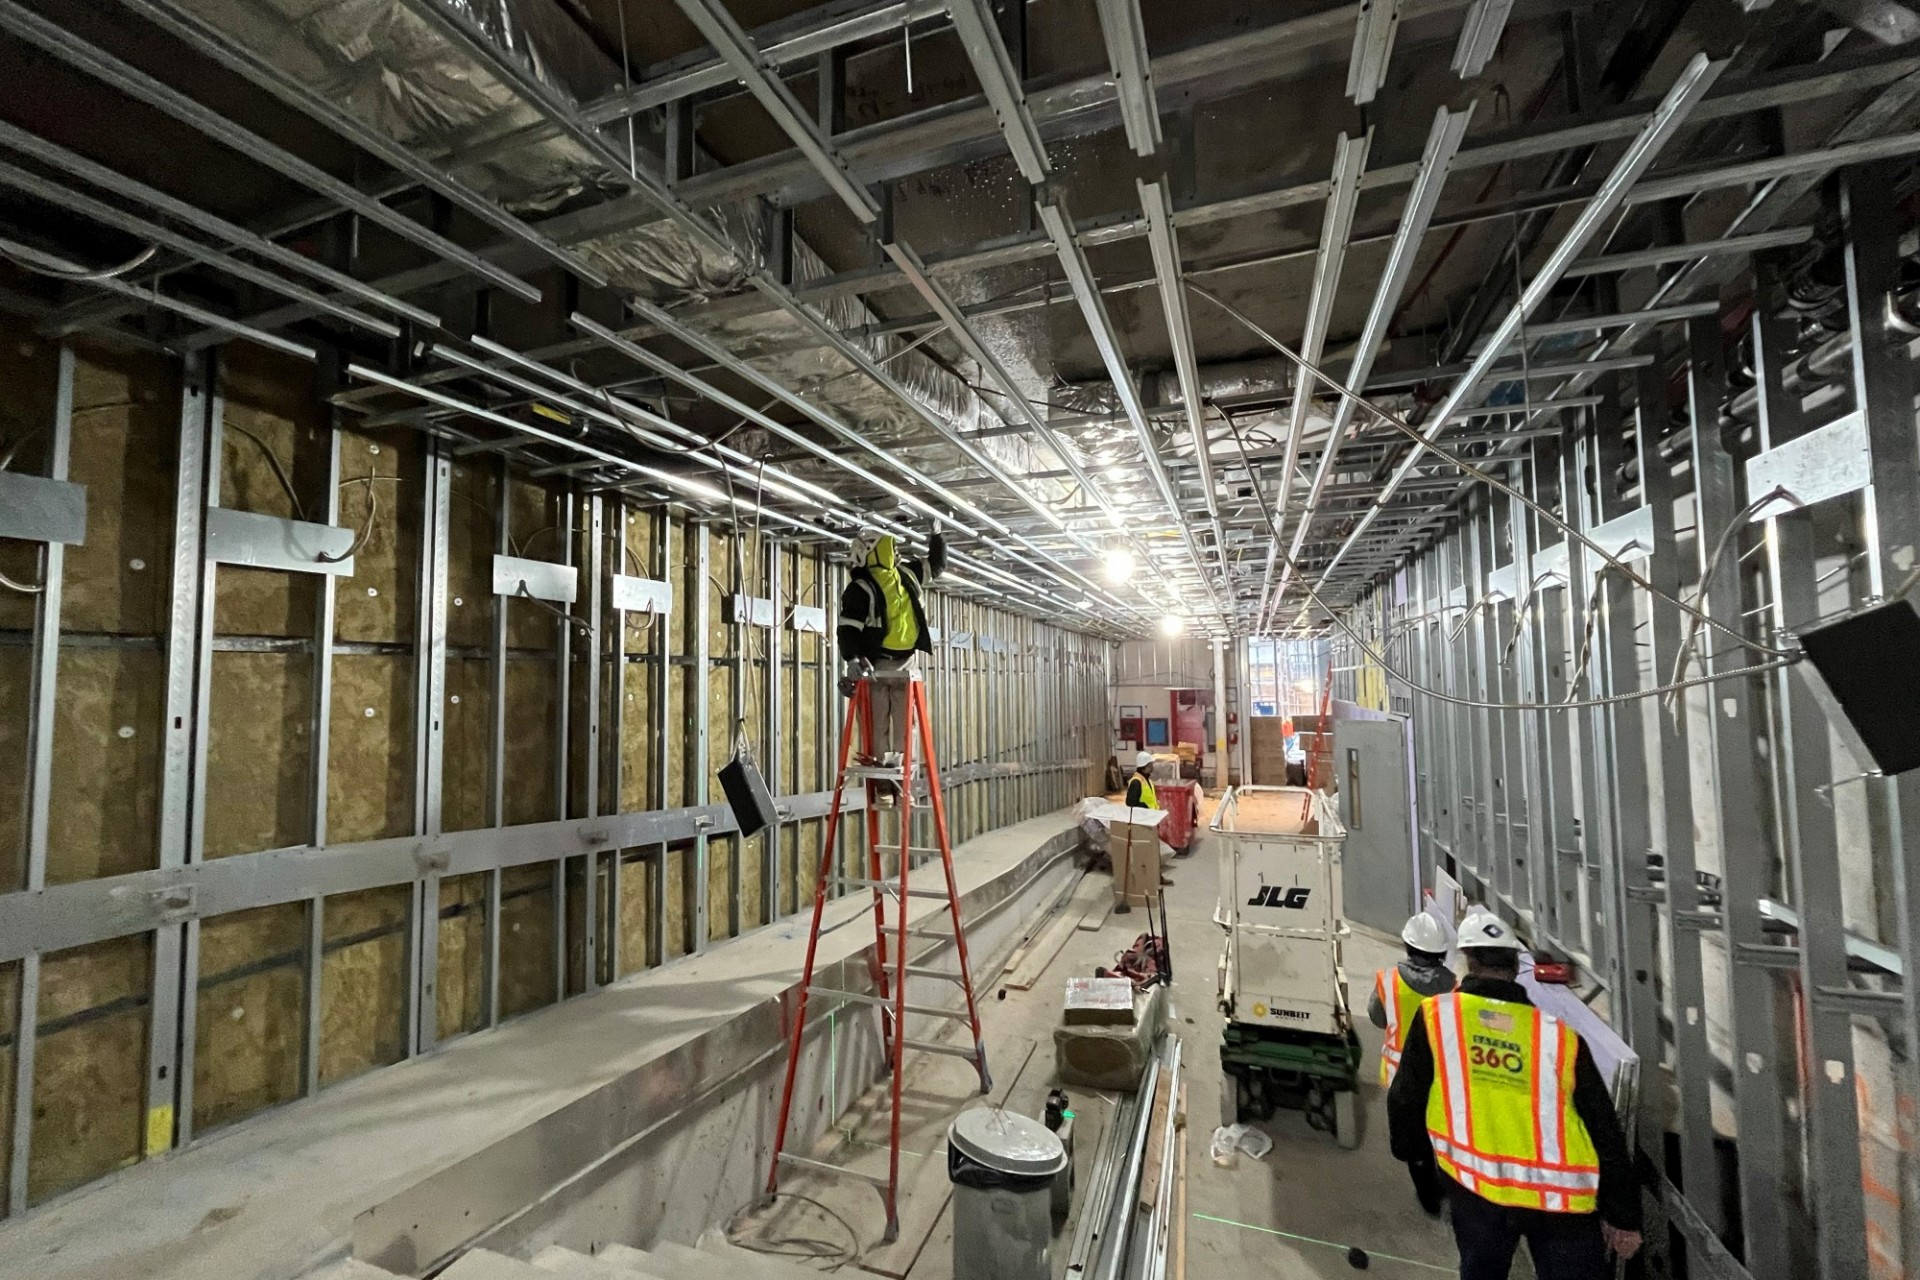 The lobby of 600 W. 125th Street that is under construction and has steel framing and insulation installed.